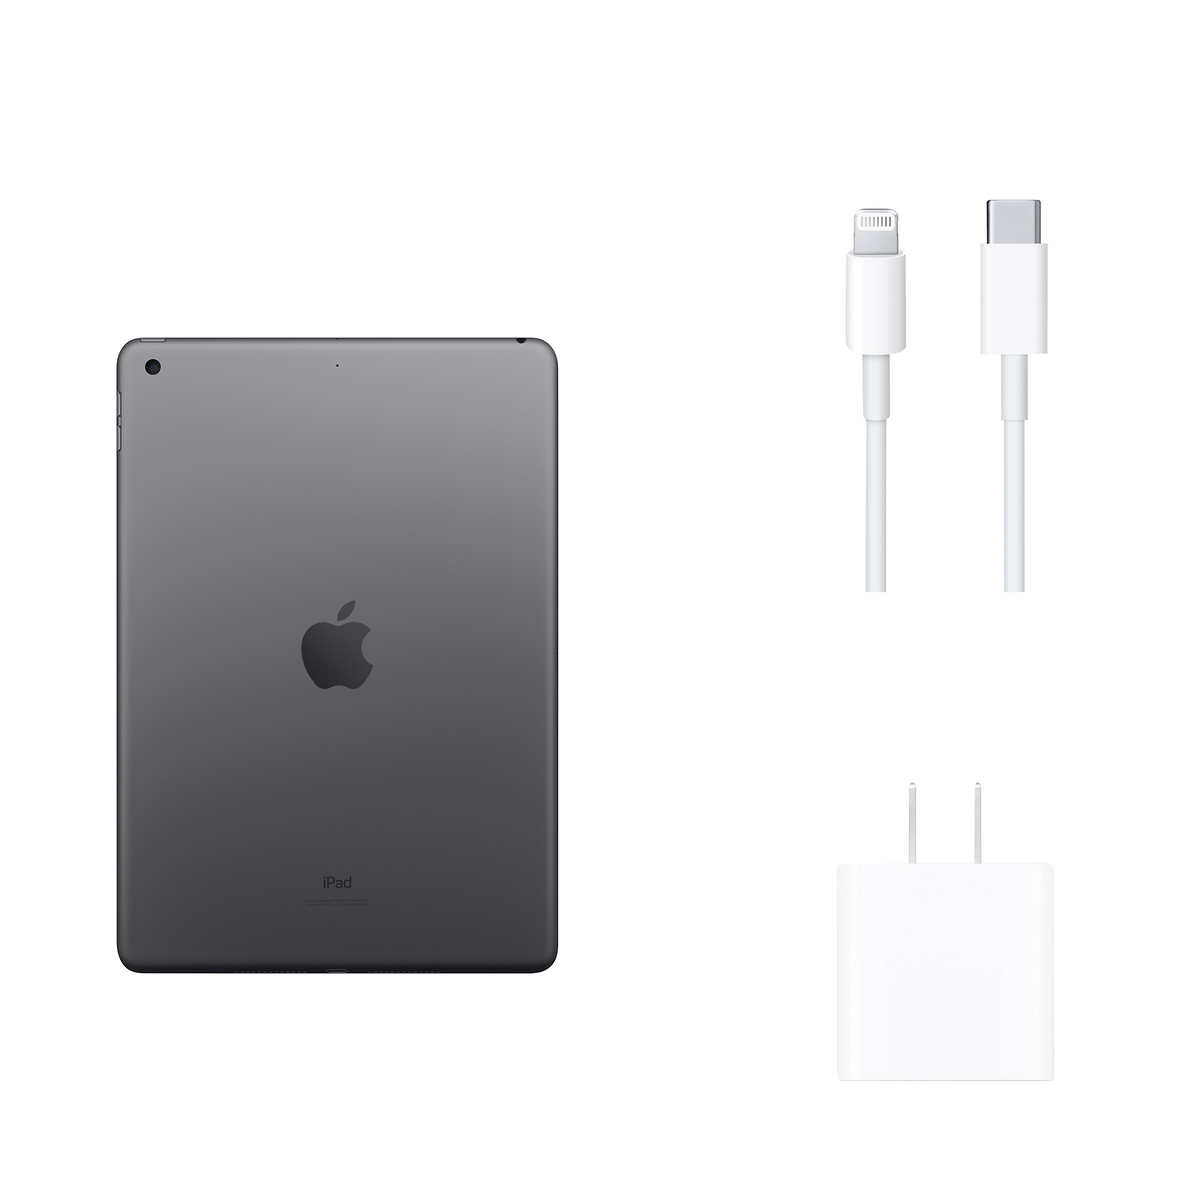 2021 Apple 10.2-inch iPad Wi-Fi 64GB - Space Gray (9th Generation) - image 4 of 4